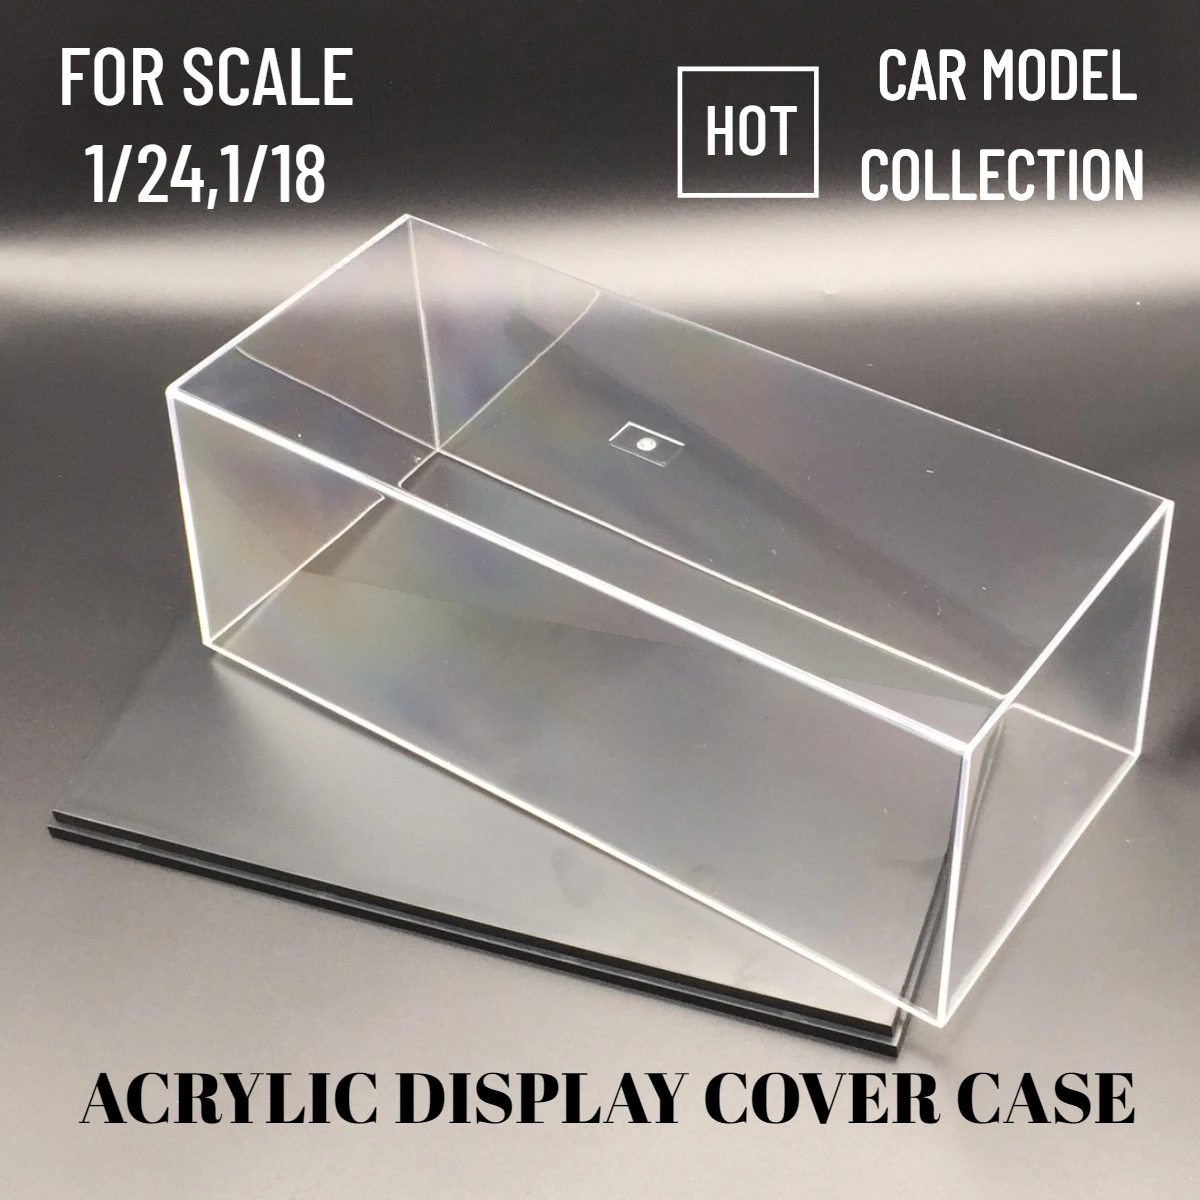 Scale 1:24 1:18 Car Model Display Case Transparent Acrylic Dust Proof Hard Cover PVC Box for Figure Collectible Miniature 1 64 scale gfcc classic 1973 450sl hardtop vehicle diecast toy model car acrylic box hobby gift of collectible